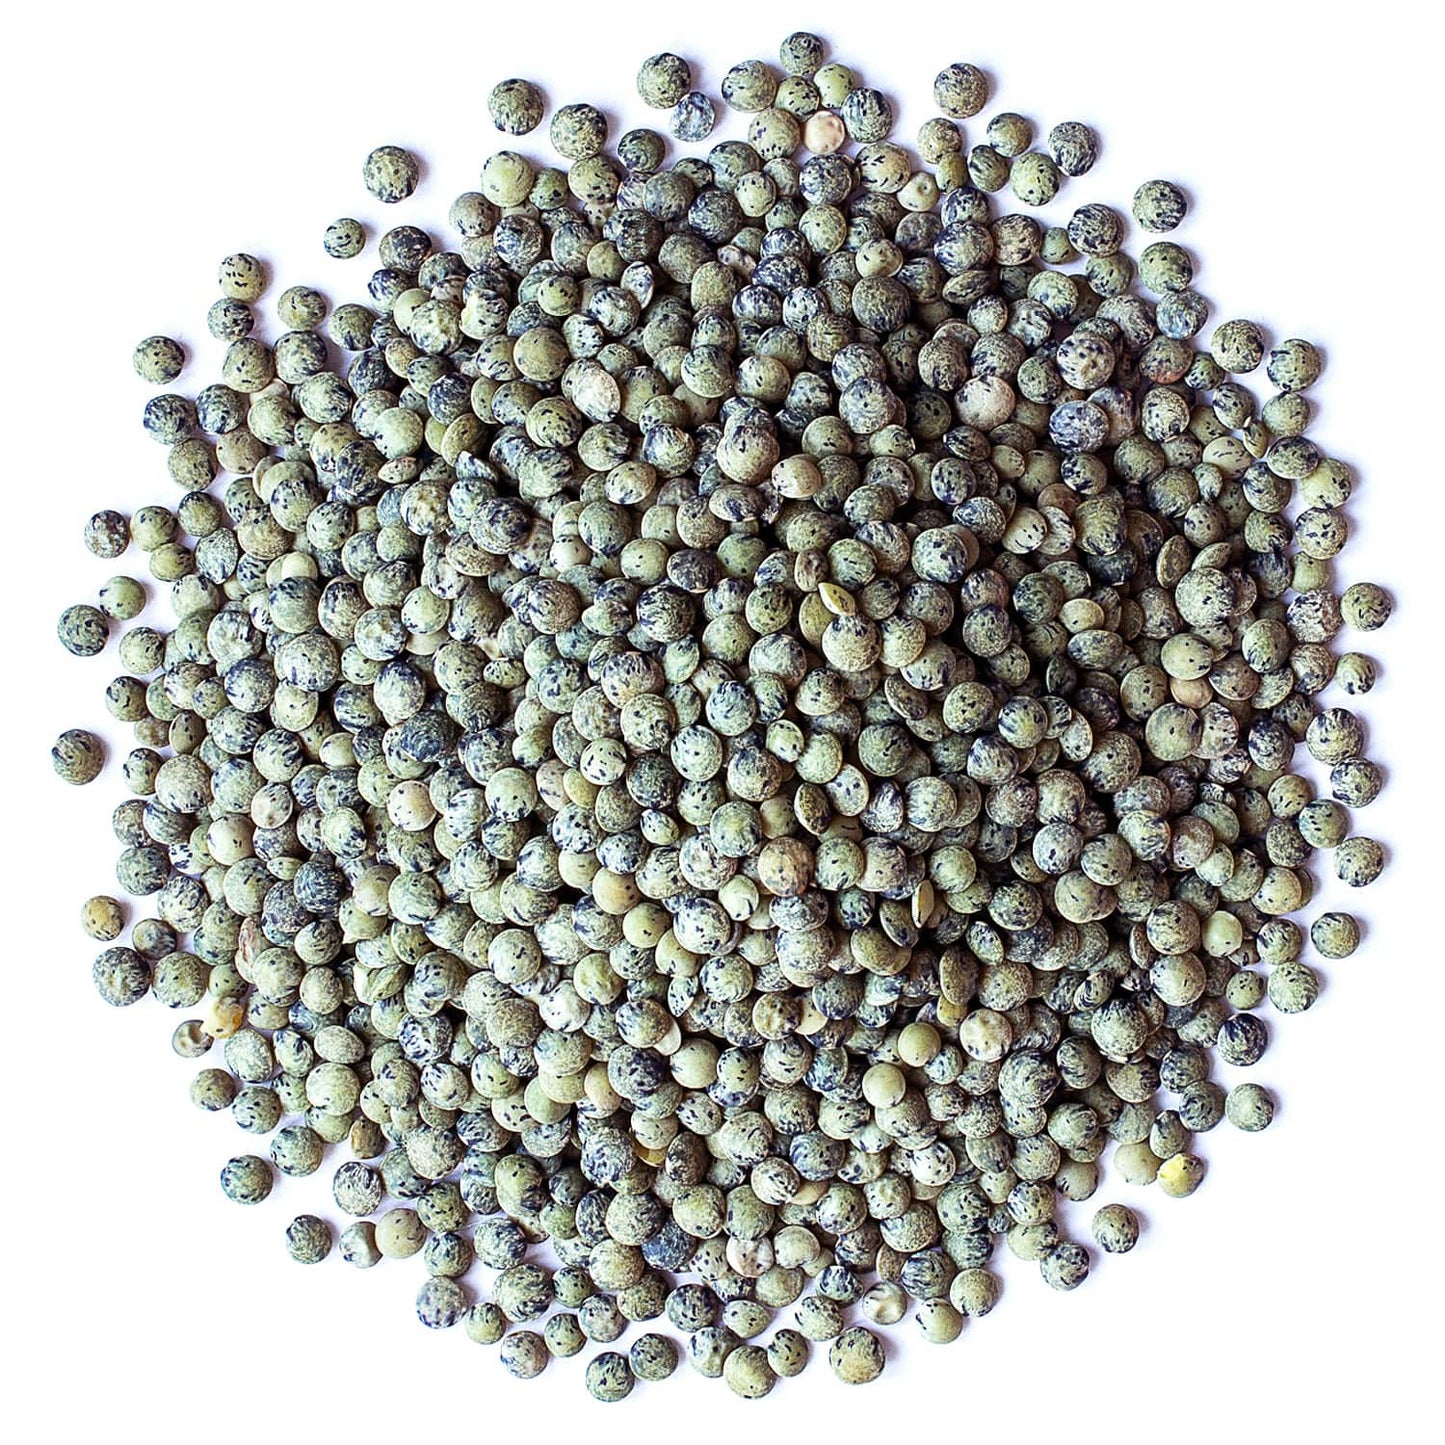 Organic French Green Lentils - Whole Dry Beans, Non-GMO, Kosher, Raw, Sproutable, Bulk - by Food to Live